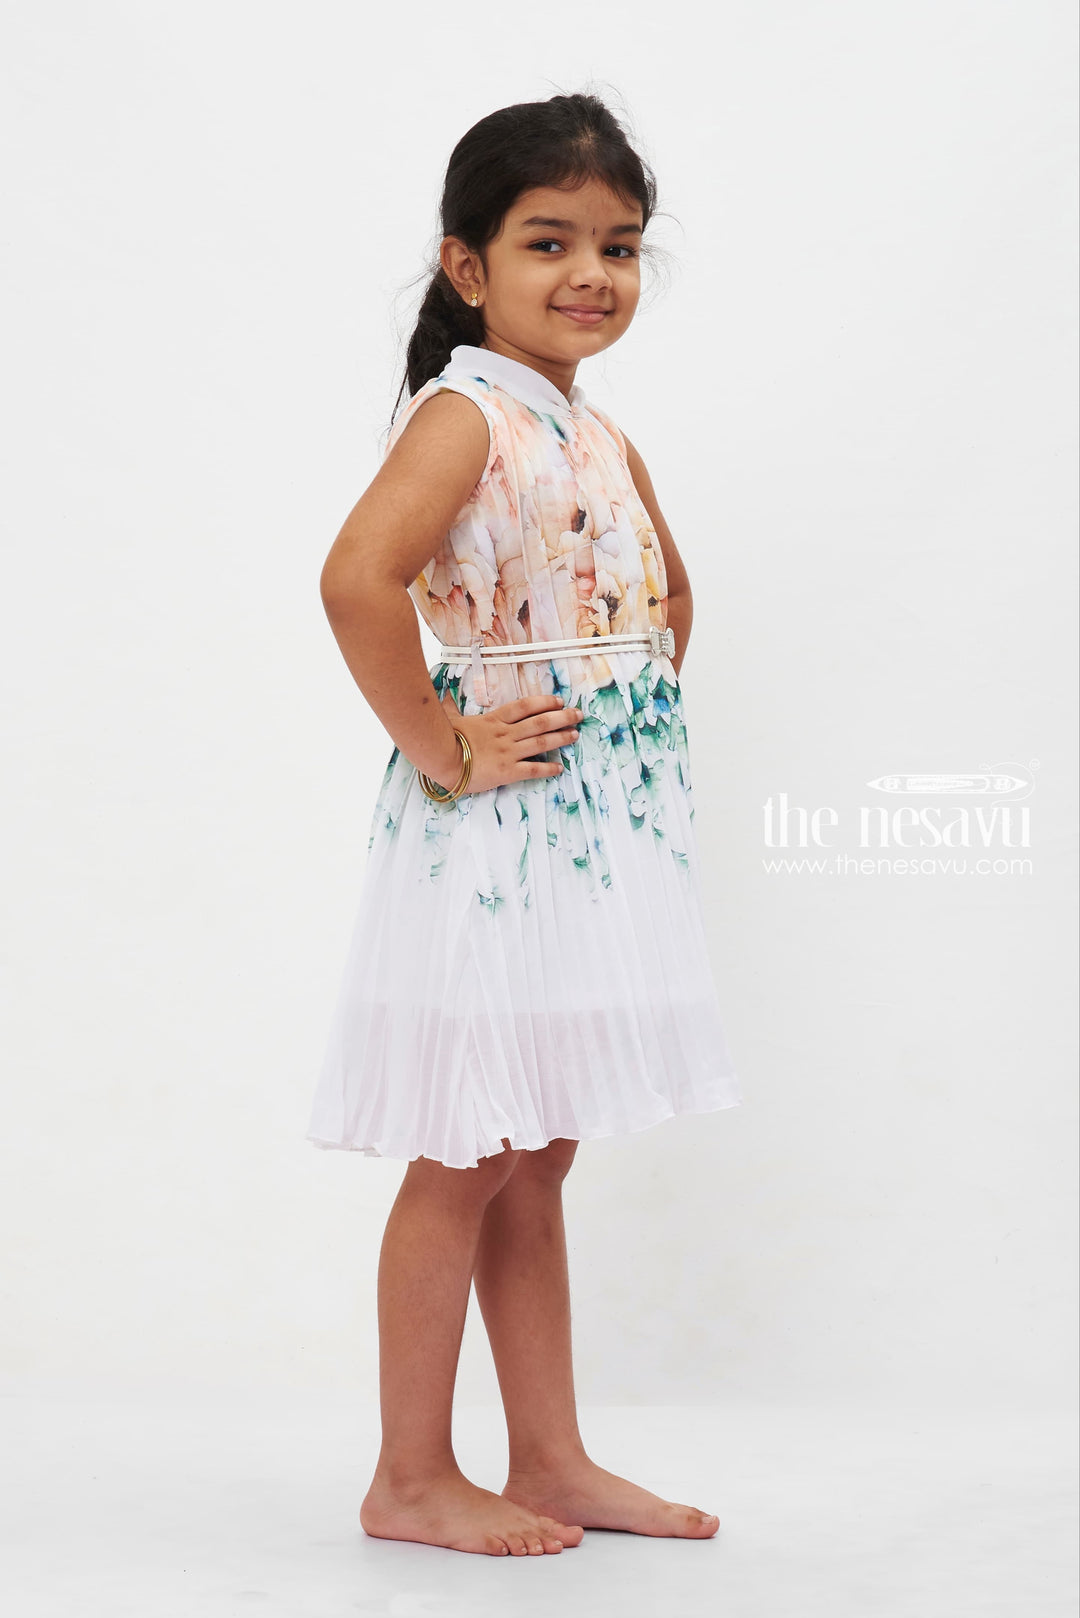 The Nesavu Girls Fancy Frock Whimsical Watercolor Floral Pleated Dress: Dreamy Blue Hues for Girls Nesavu Girls' Floral Pleated Summer Dress | Elegant Occasion Wear for Kids | The Nesavu